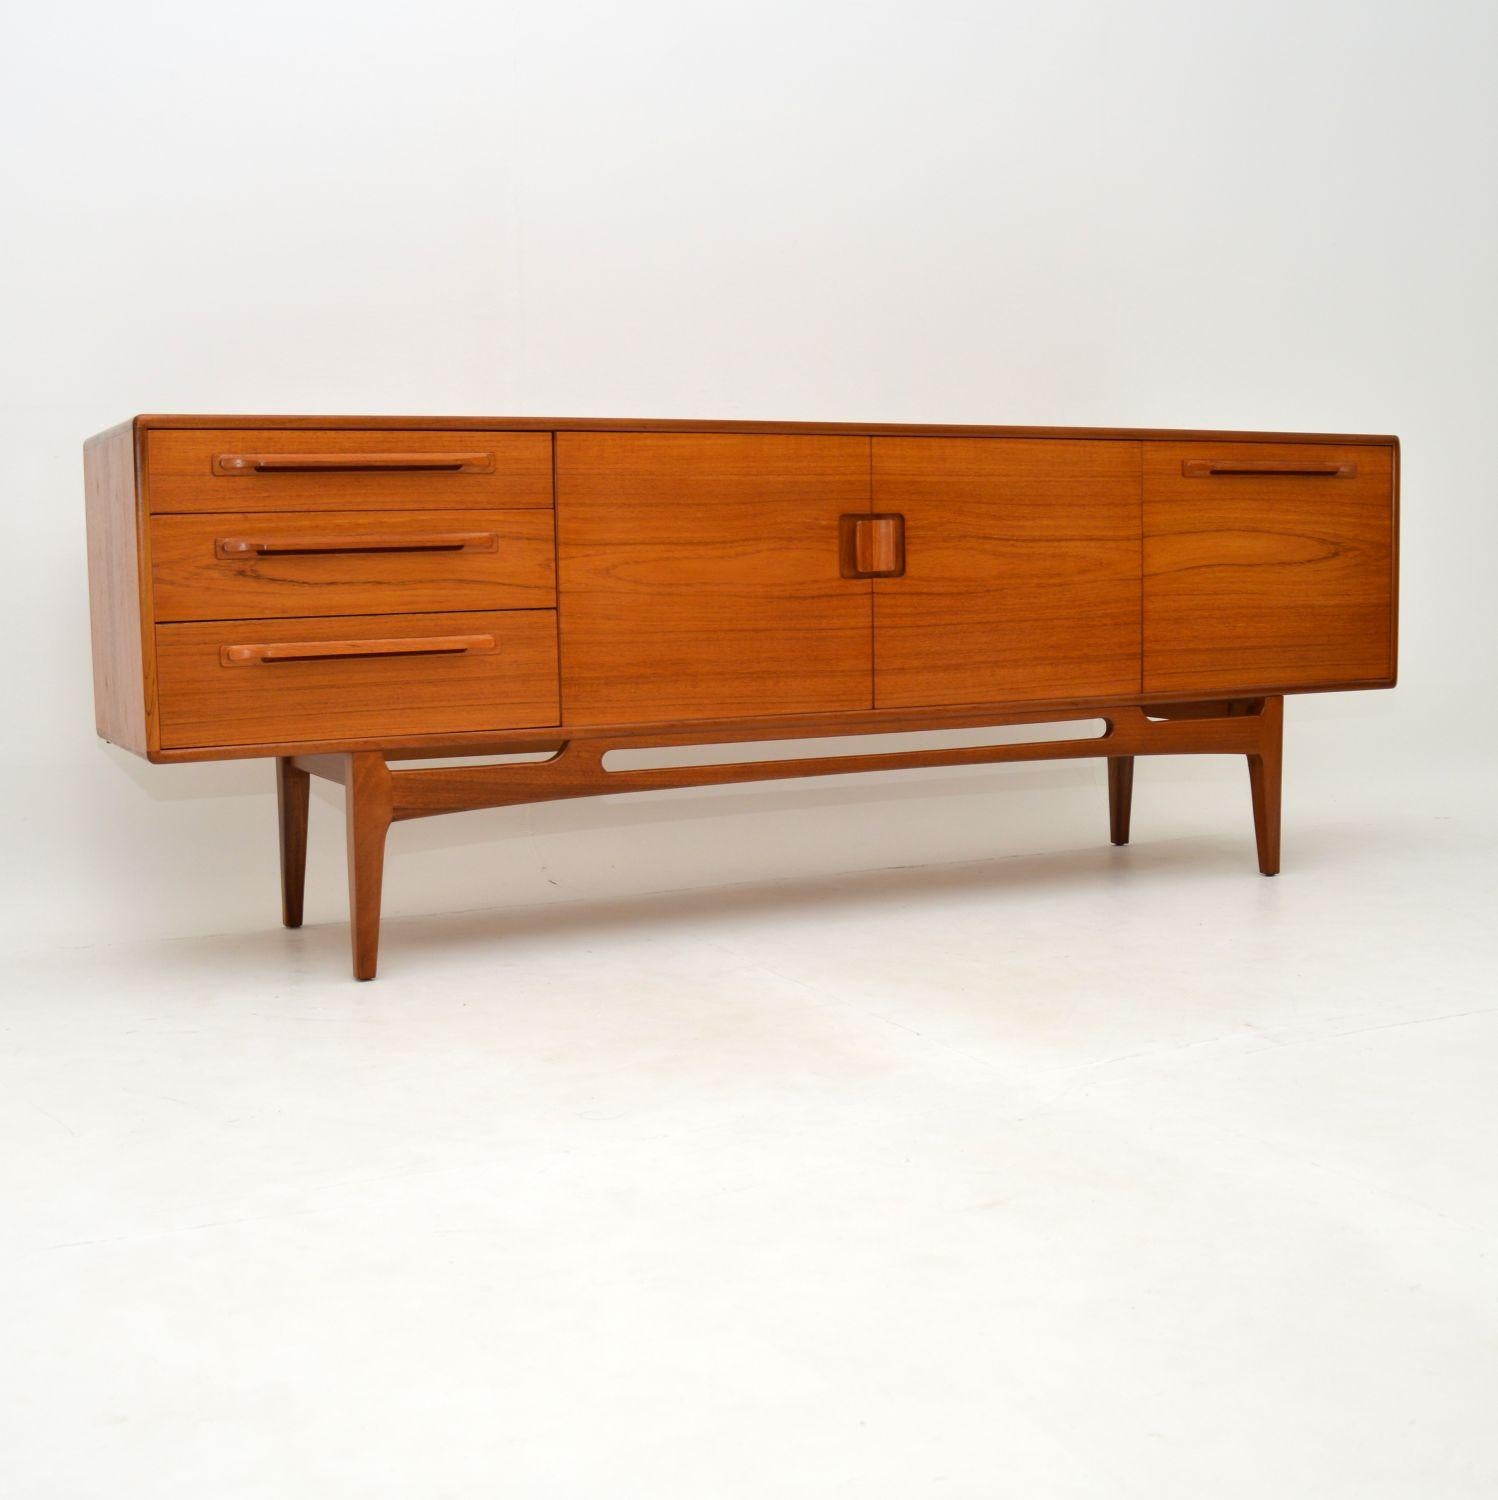 A stunning and very rare teak sideboard by British manufacturer Beithcraft. This was made in Scotland, it dates from the 1960’s.

This has a fantastic low and sleek design, with lots of storage space. The quality is exceptional, the pierced base